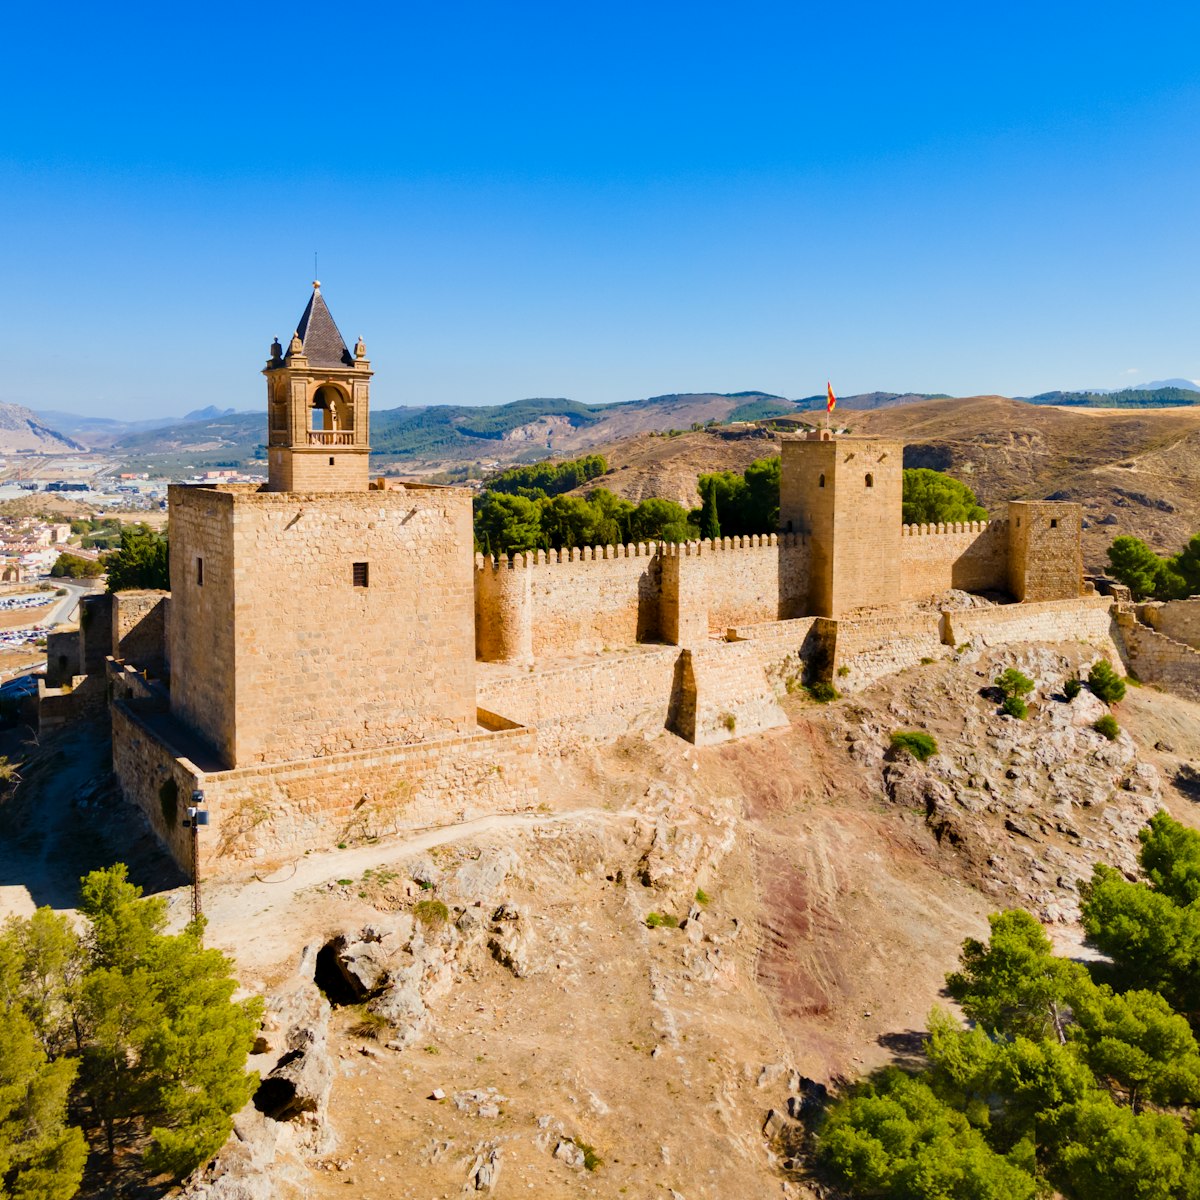 The Alcazaba of Antequera, a Moorish fortress in Antequera city in the province of Malaga.